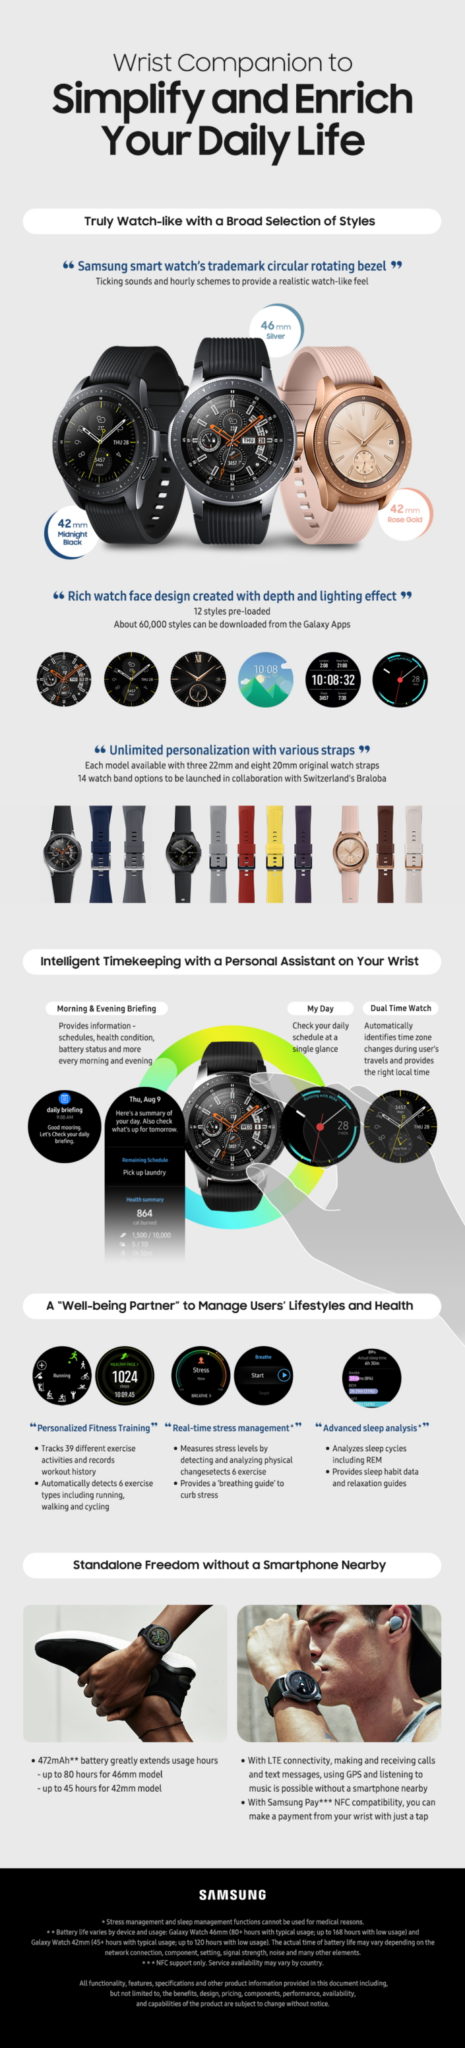 [Infographic] Samsung Galaxy Watch: Designed for All Lifestyles